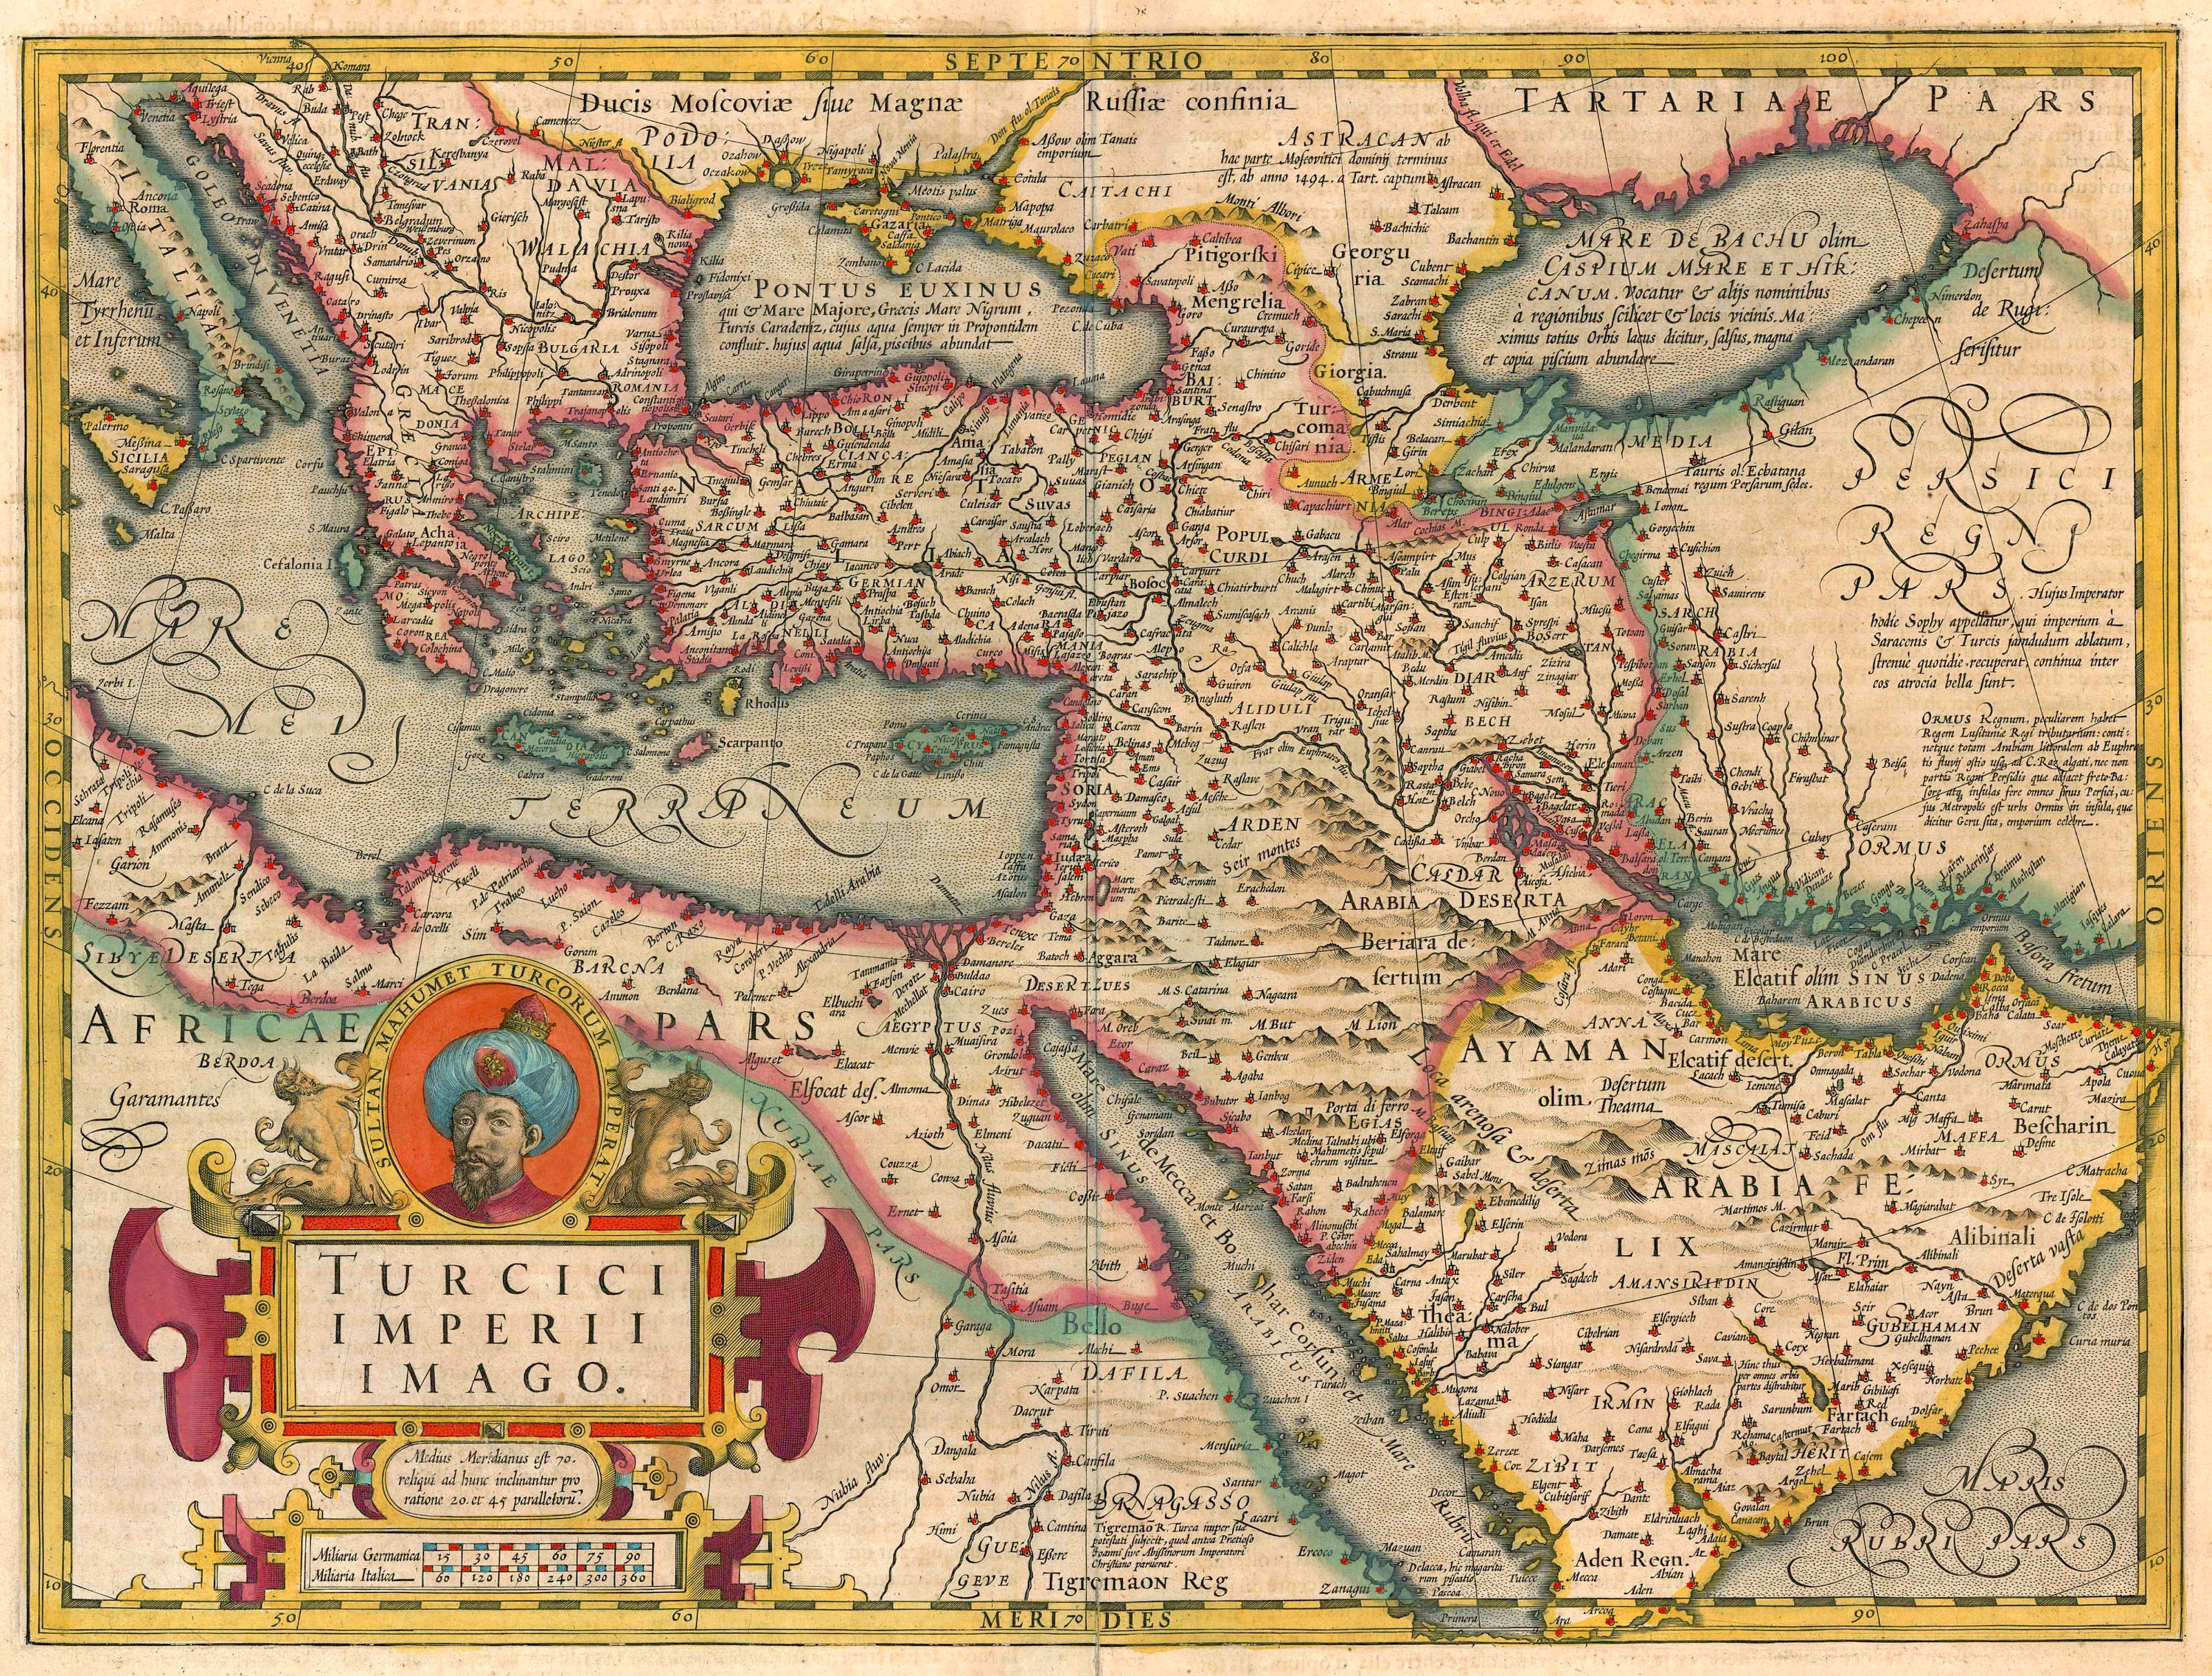 Ottoman Empire Old Map File:antique Map Of The Ottoman Empire By J. Hondius, Cartouche With  Portrait Medallion Of Sultan Mahumet.jpg - Wikimedia Commons